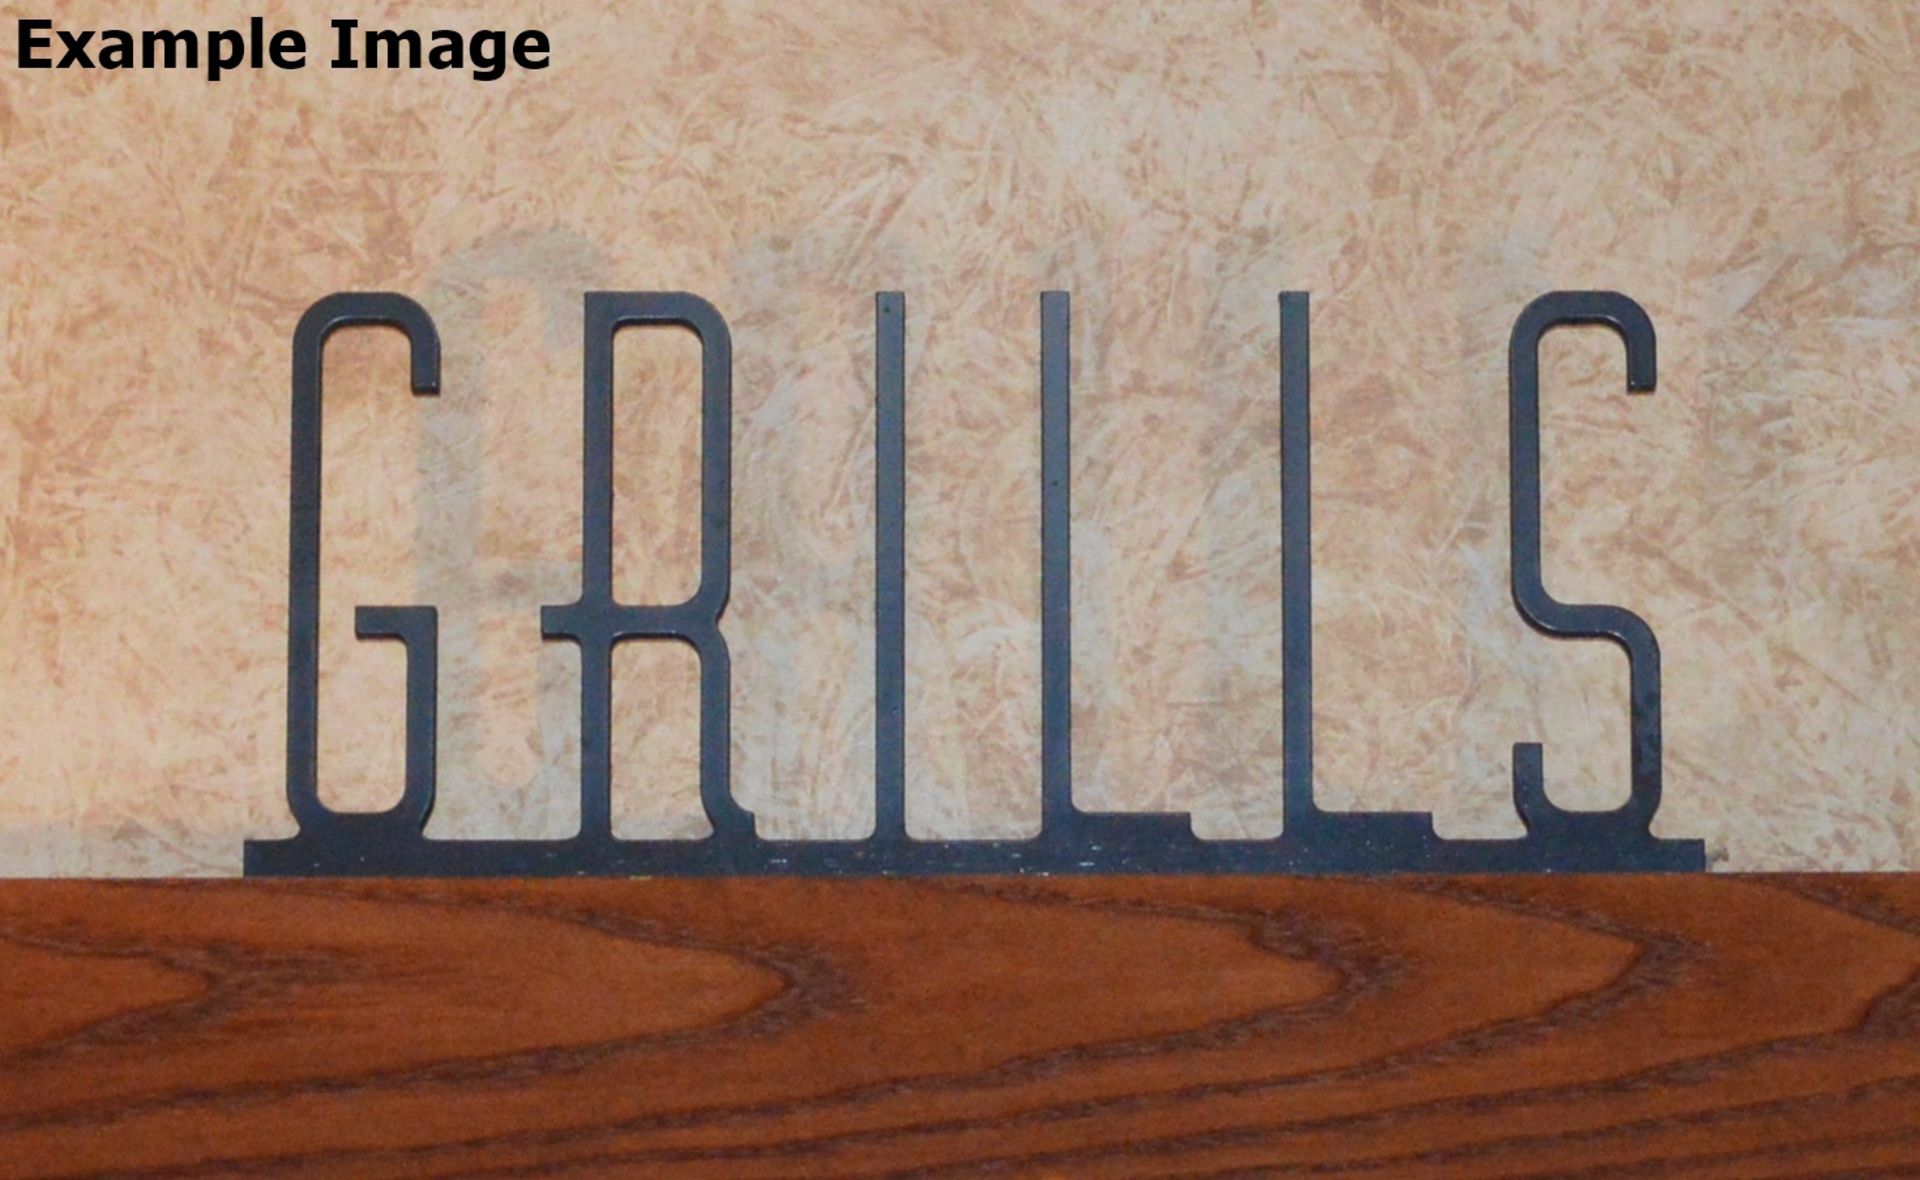 7 x Wooden Signs Suitable For Restaurants, Cafes, Bistros etc - Includes Grills, Amaretto, Penne, - Image 8 of 9